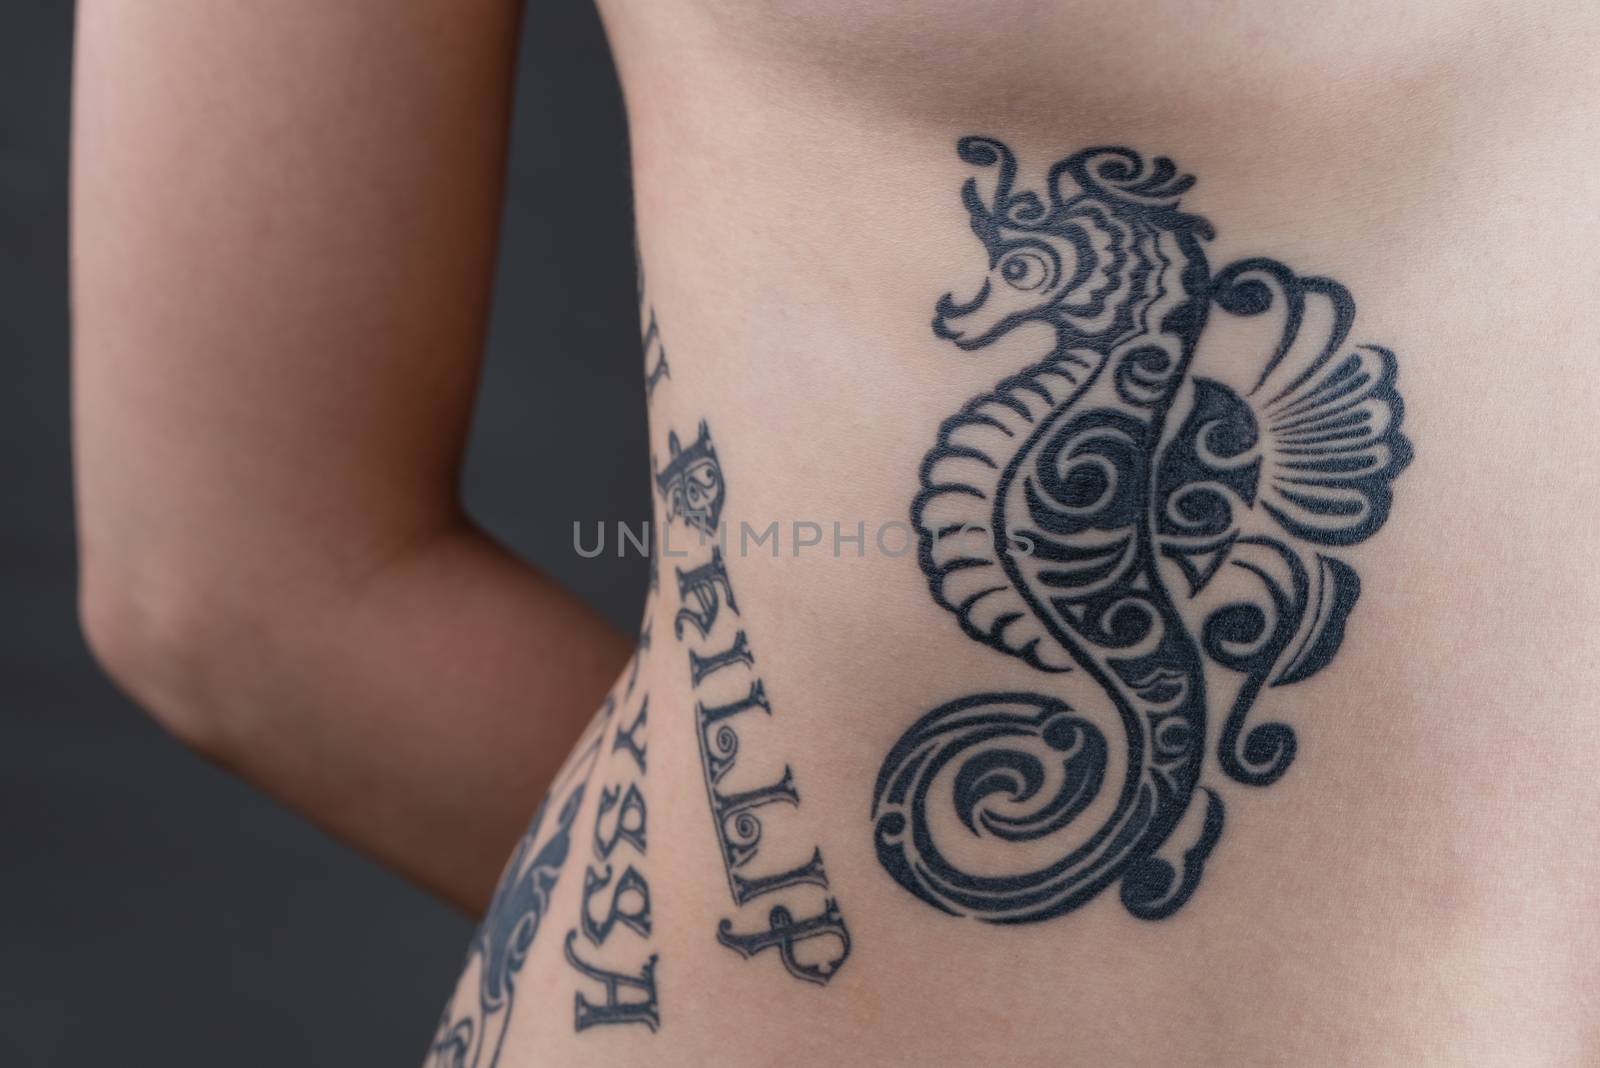 Seahorse on Ribs Tattoo by justtscott